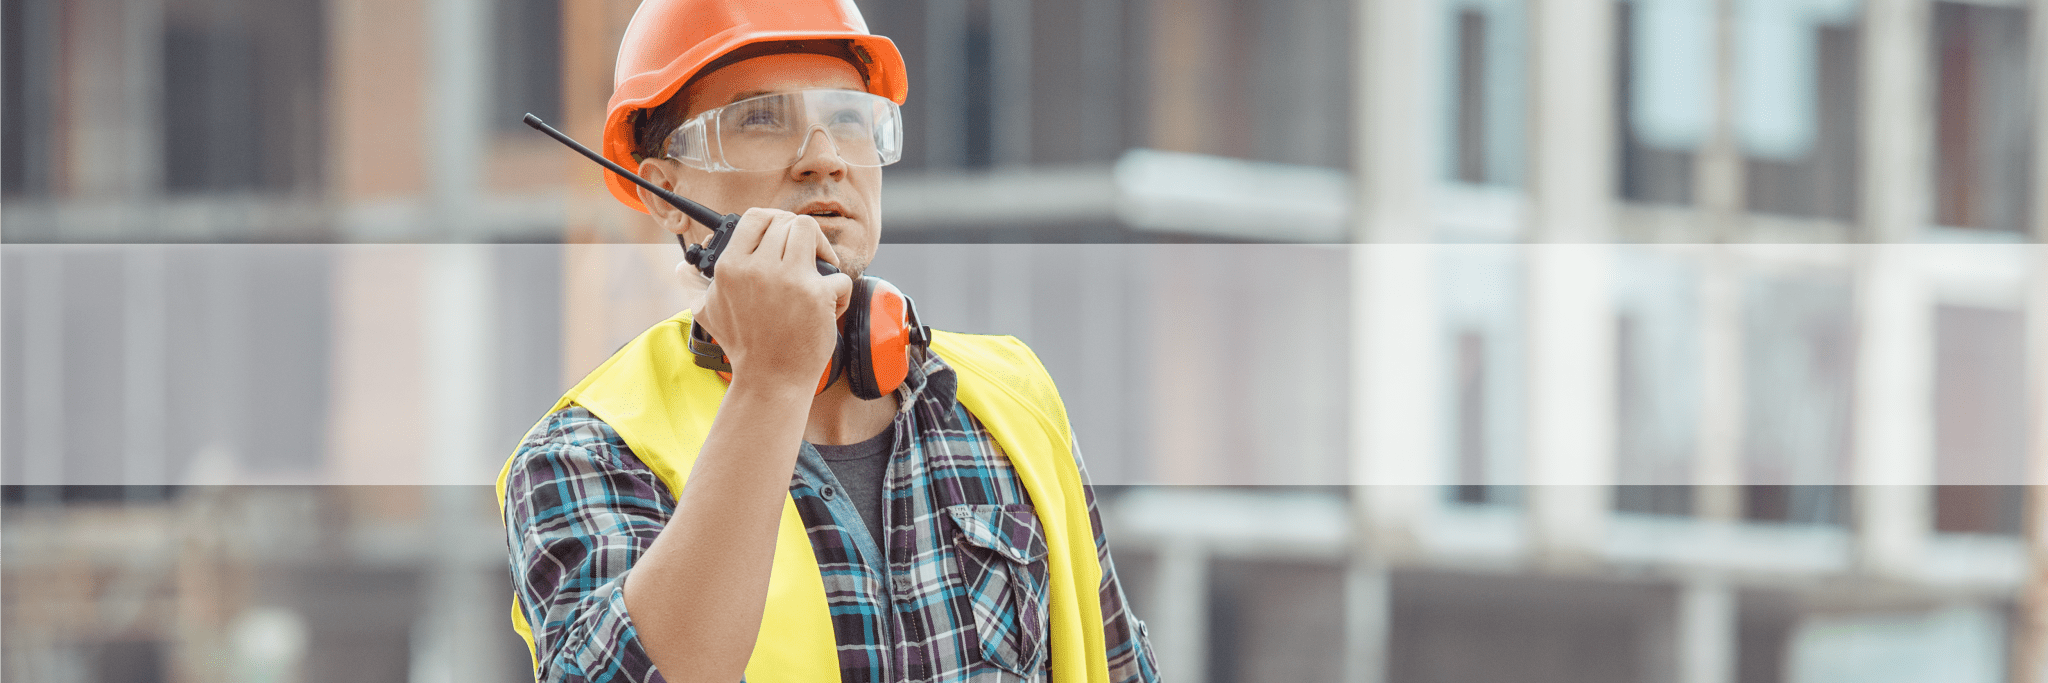 Construction worker using two way radio on work site